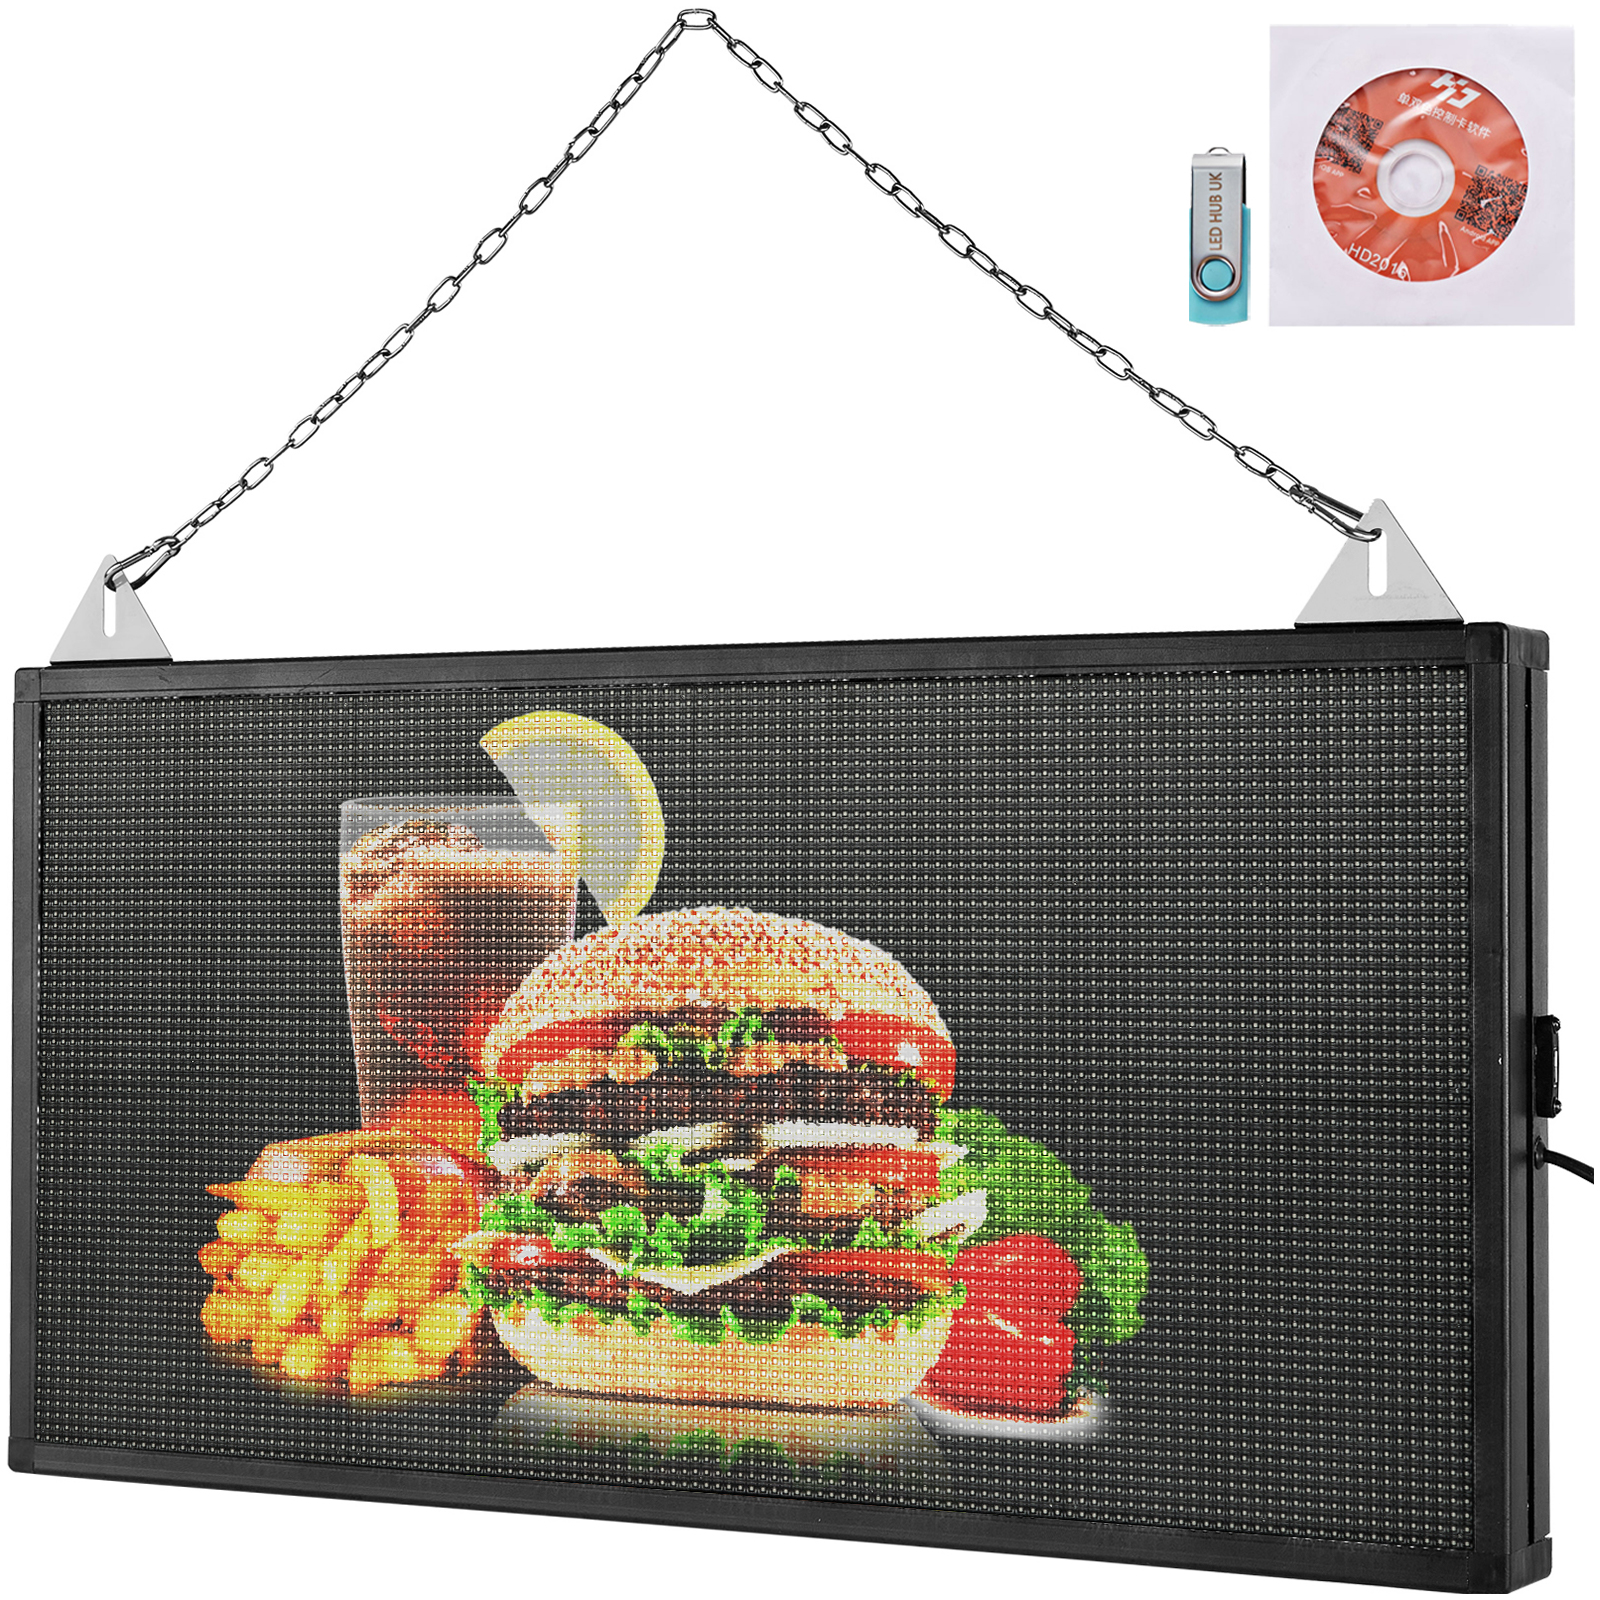 27"x 14" P5 Full Color LED Sign Programmable Scrolling Message Display BoardSale 